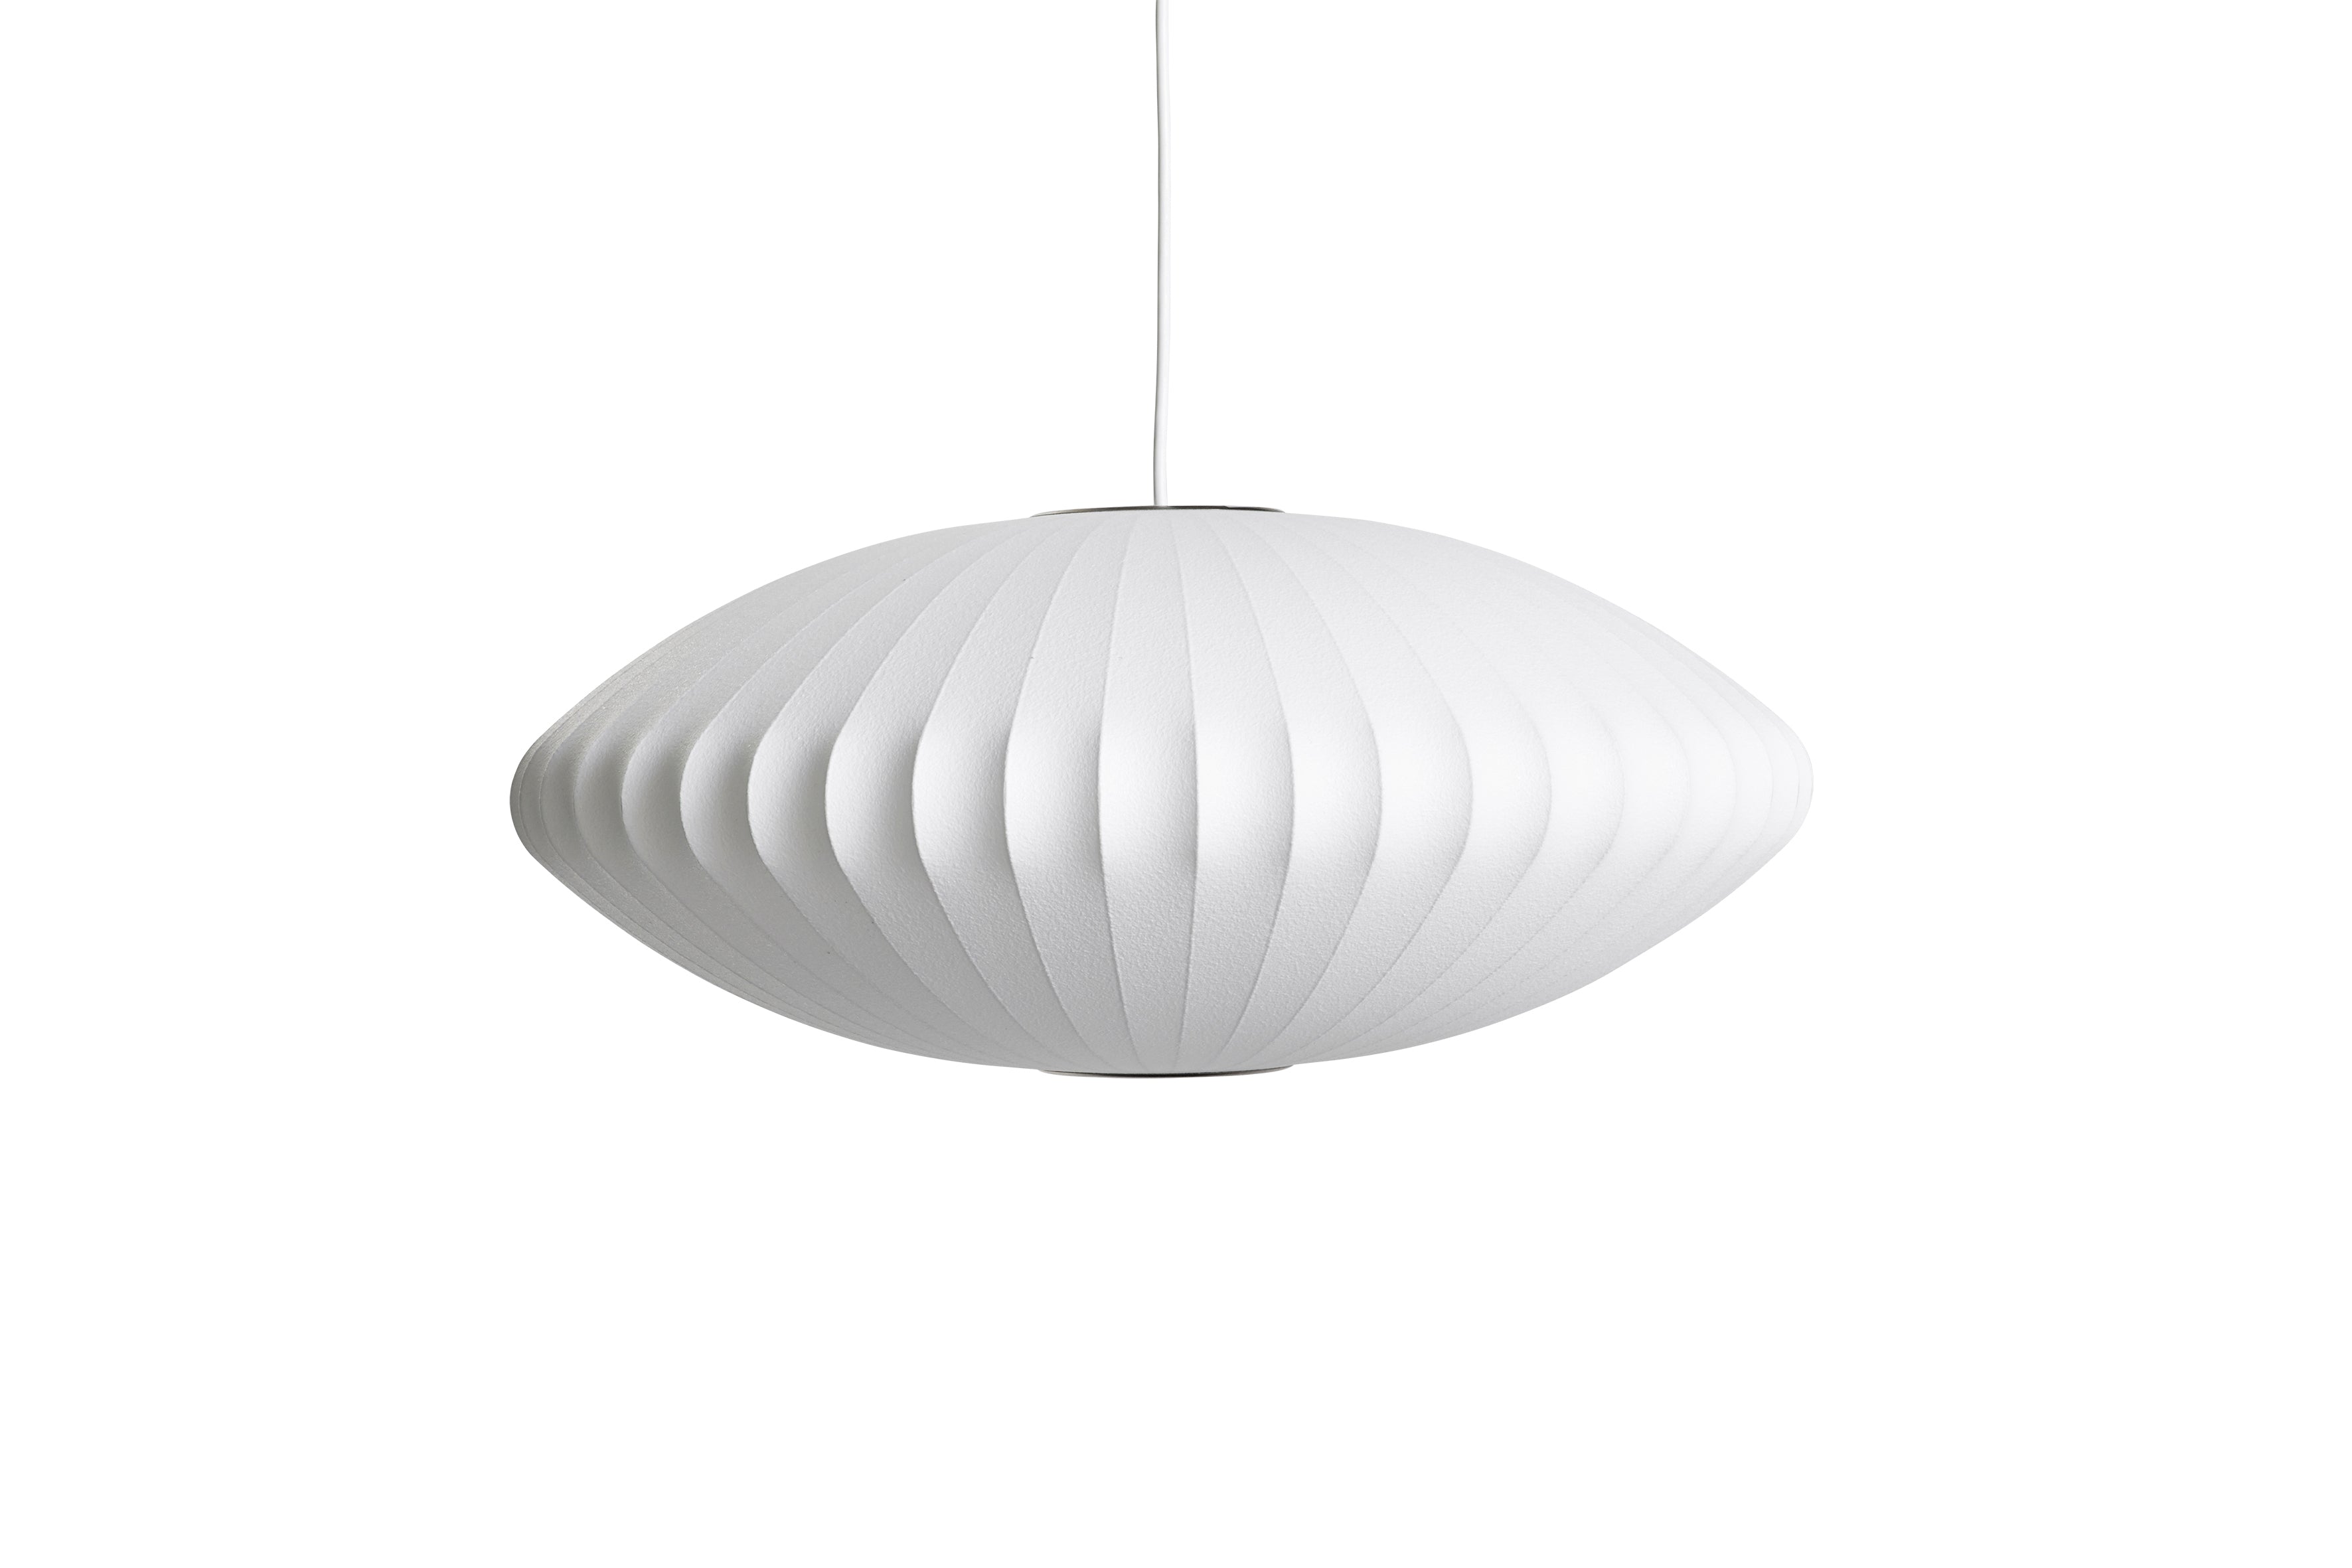 HAY Nelson Saucer Bubble Pendant Lamp by George Nelson